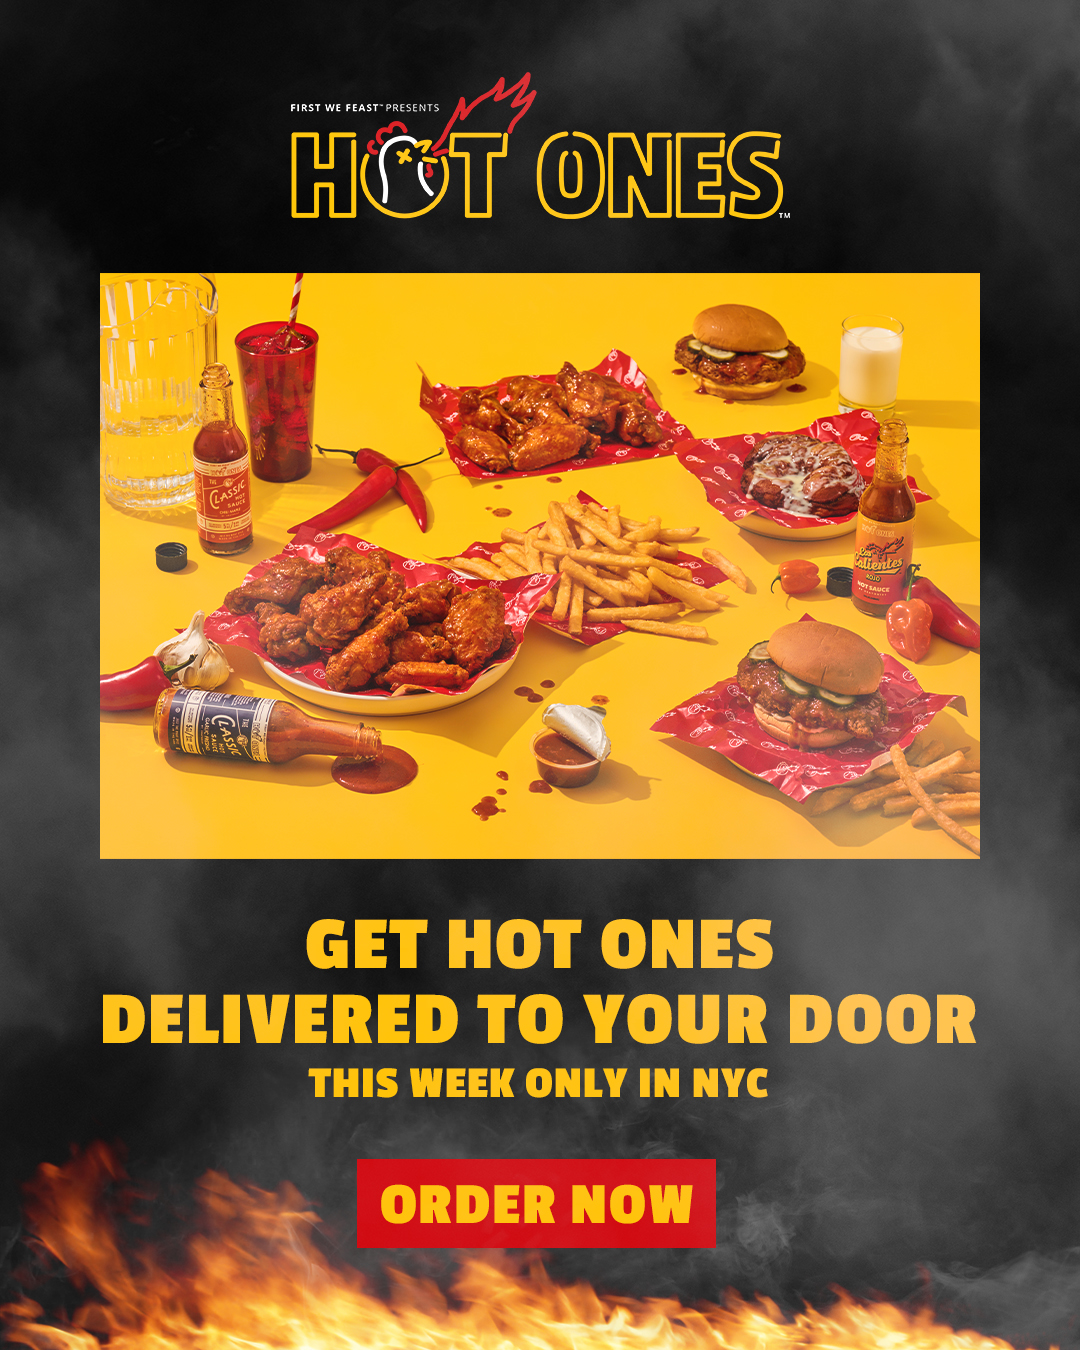 Grubhub Spices Up New York City With First-Ever Hot Ones Delivery